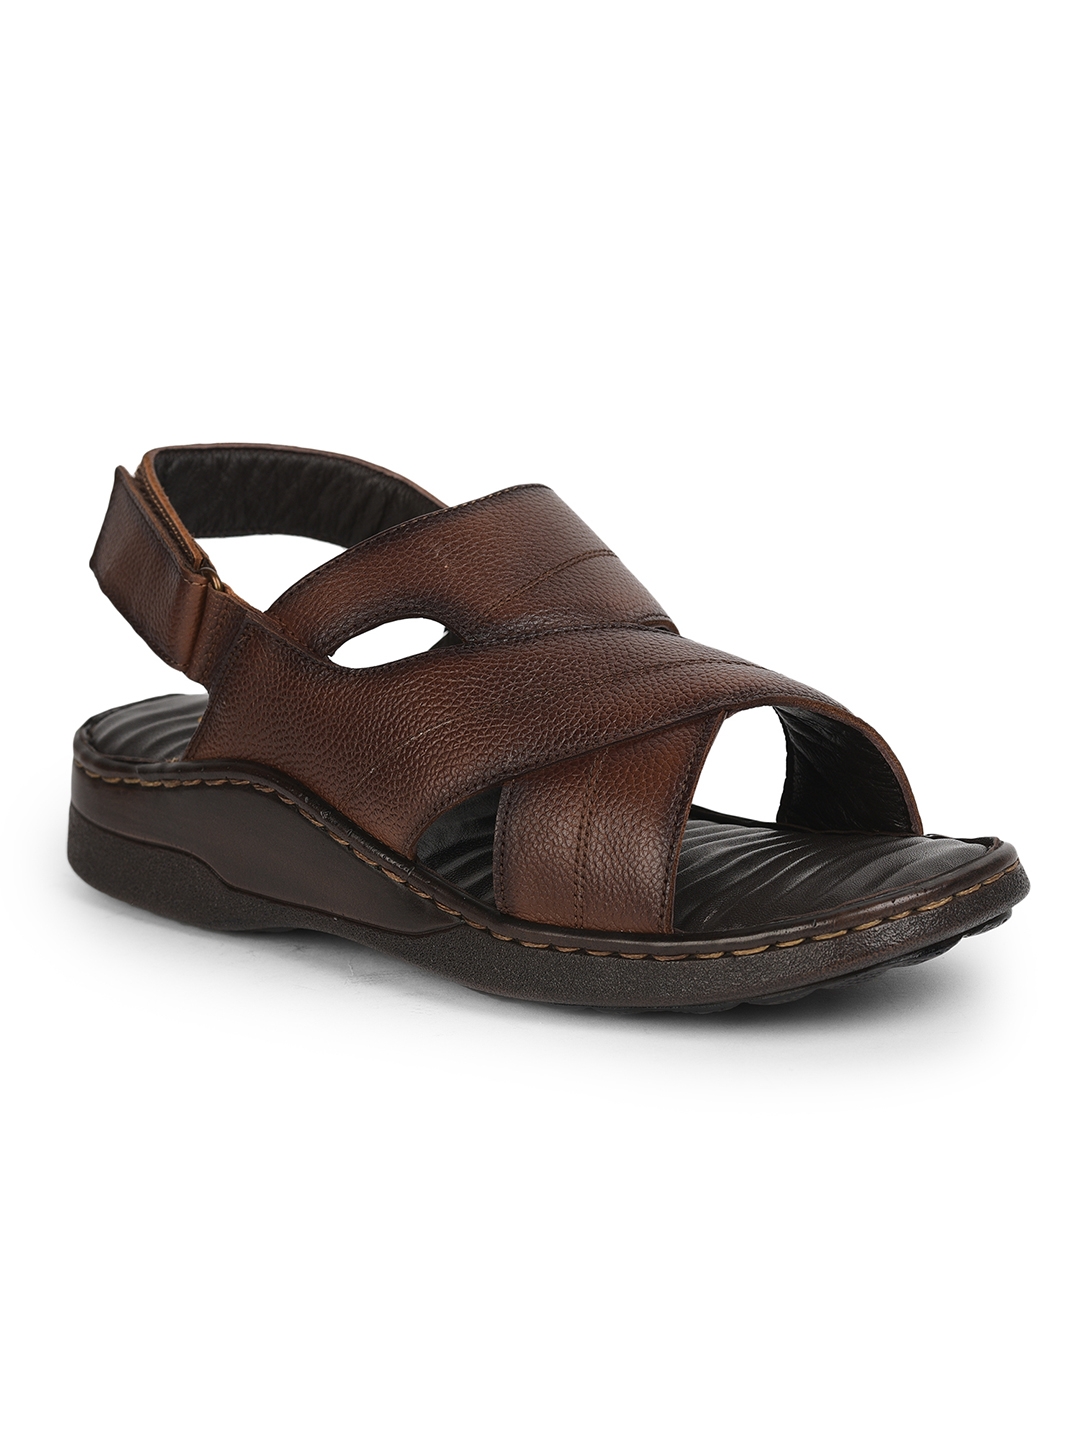 Liberty | Healers by Liberty Brown Sandals SSL-163 For :- Men